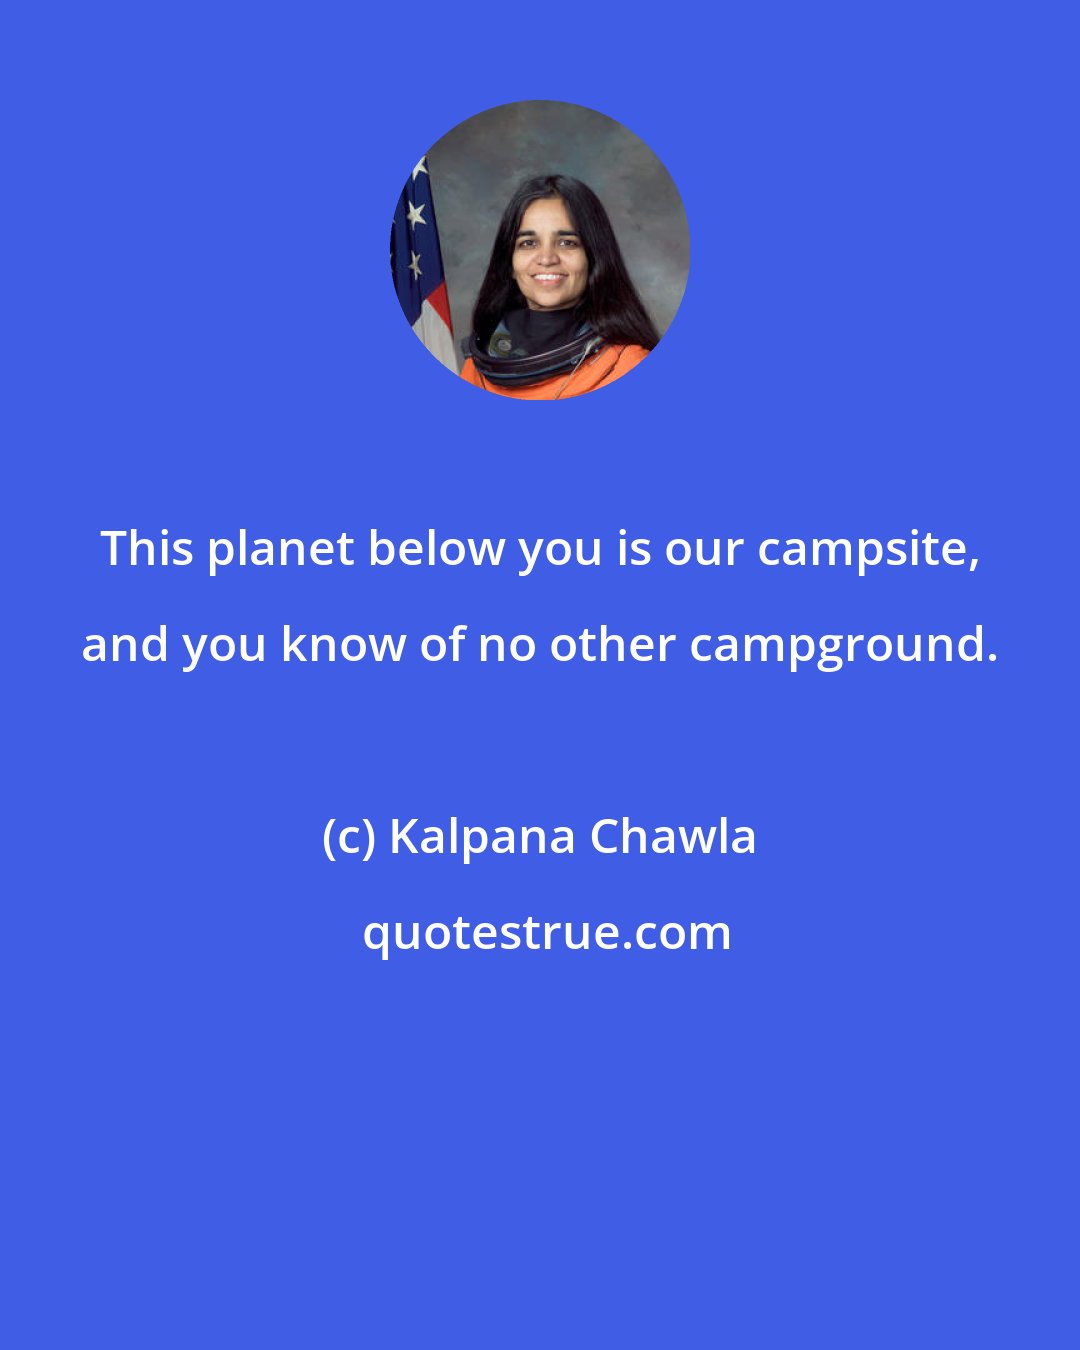 Kalpana Chawla: This planet below you is our campsite, and you know of no other campground.